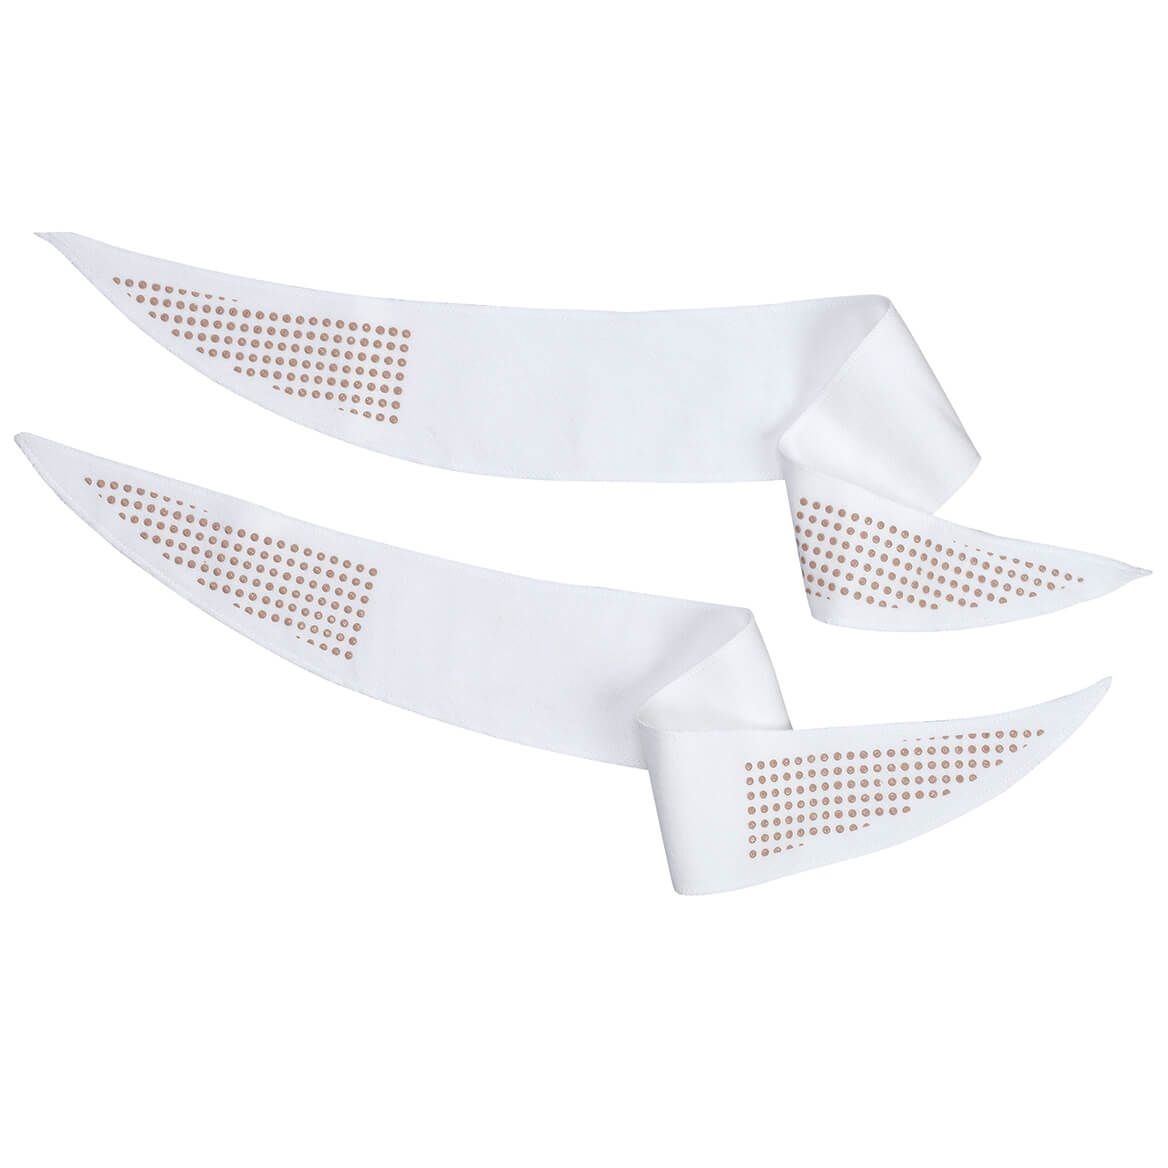 Tummy Liners with Anti-Slip Comfort Dots, Set of 2 + '-' + 355388